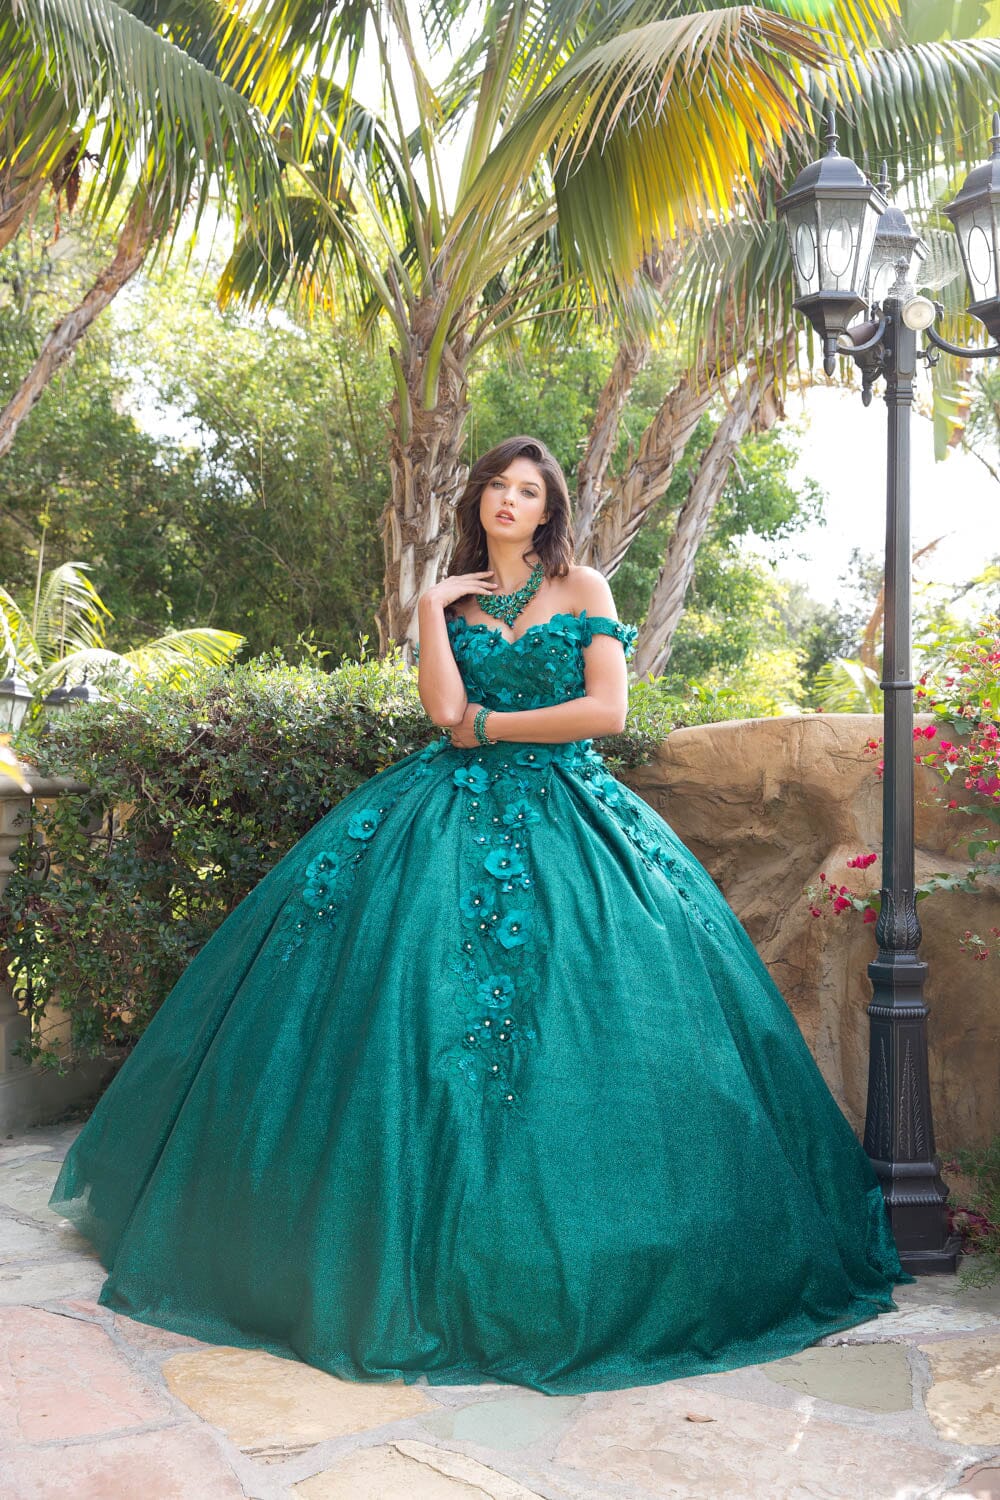 3D Floral Off Shoulder Ball Gown by Petite Adele PQ1002